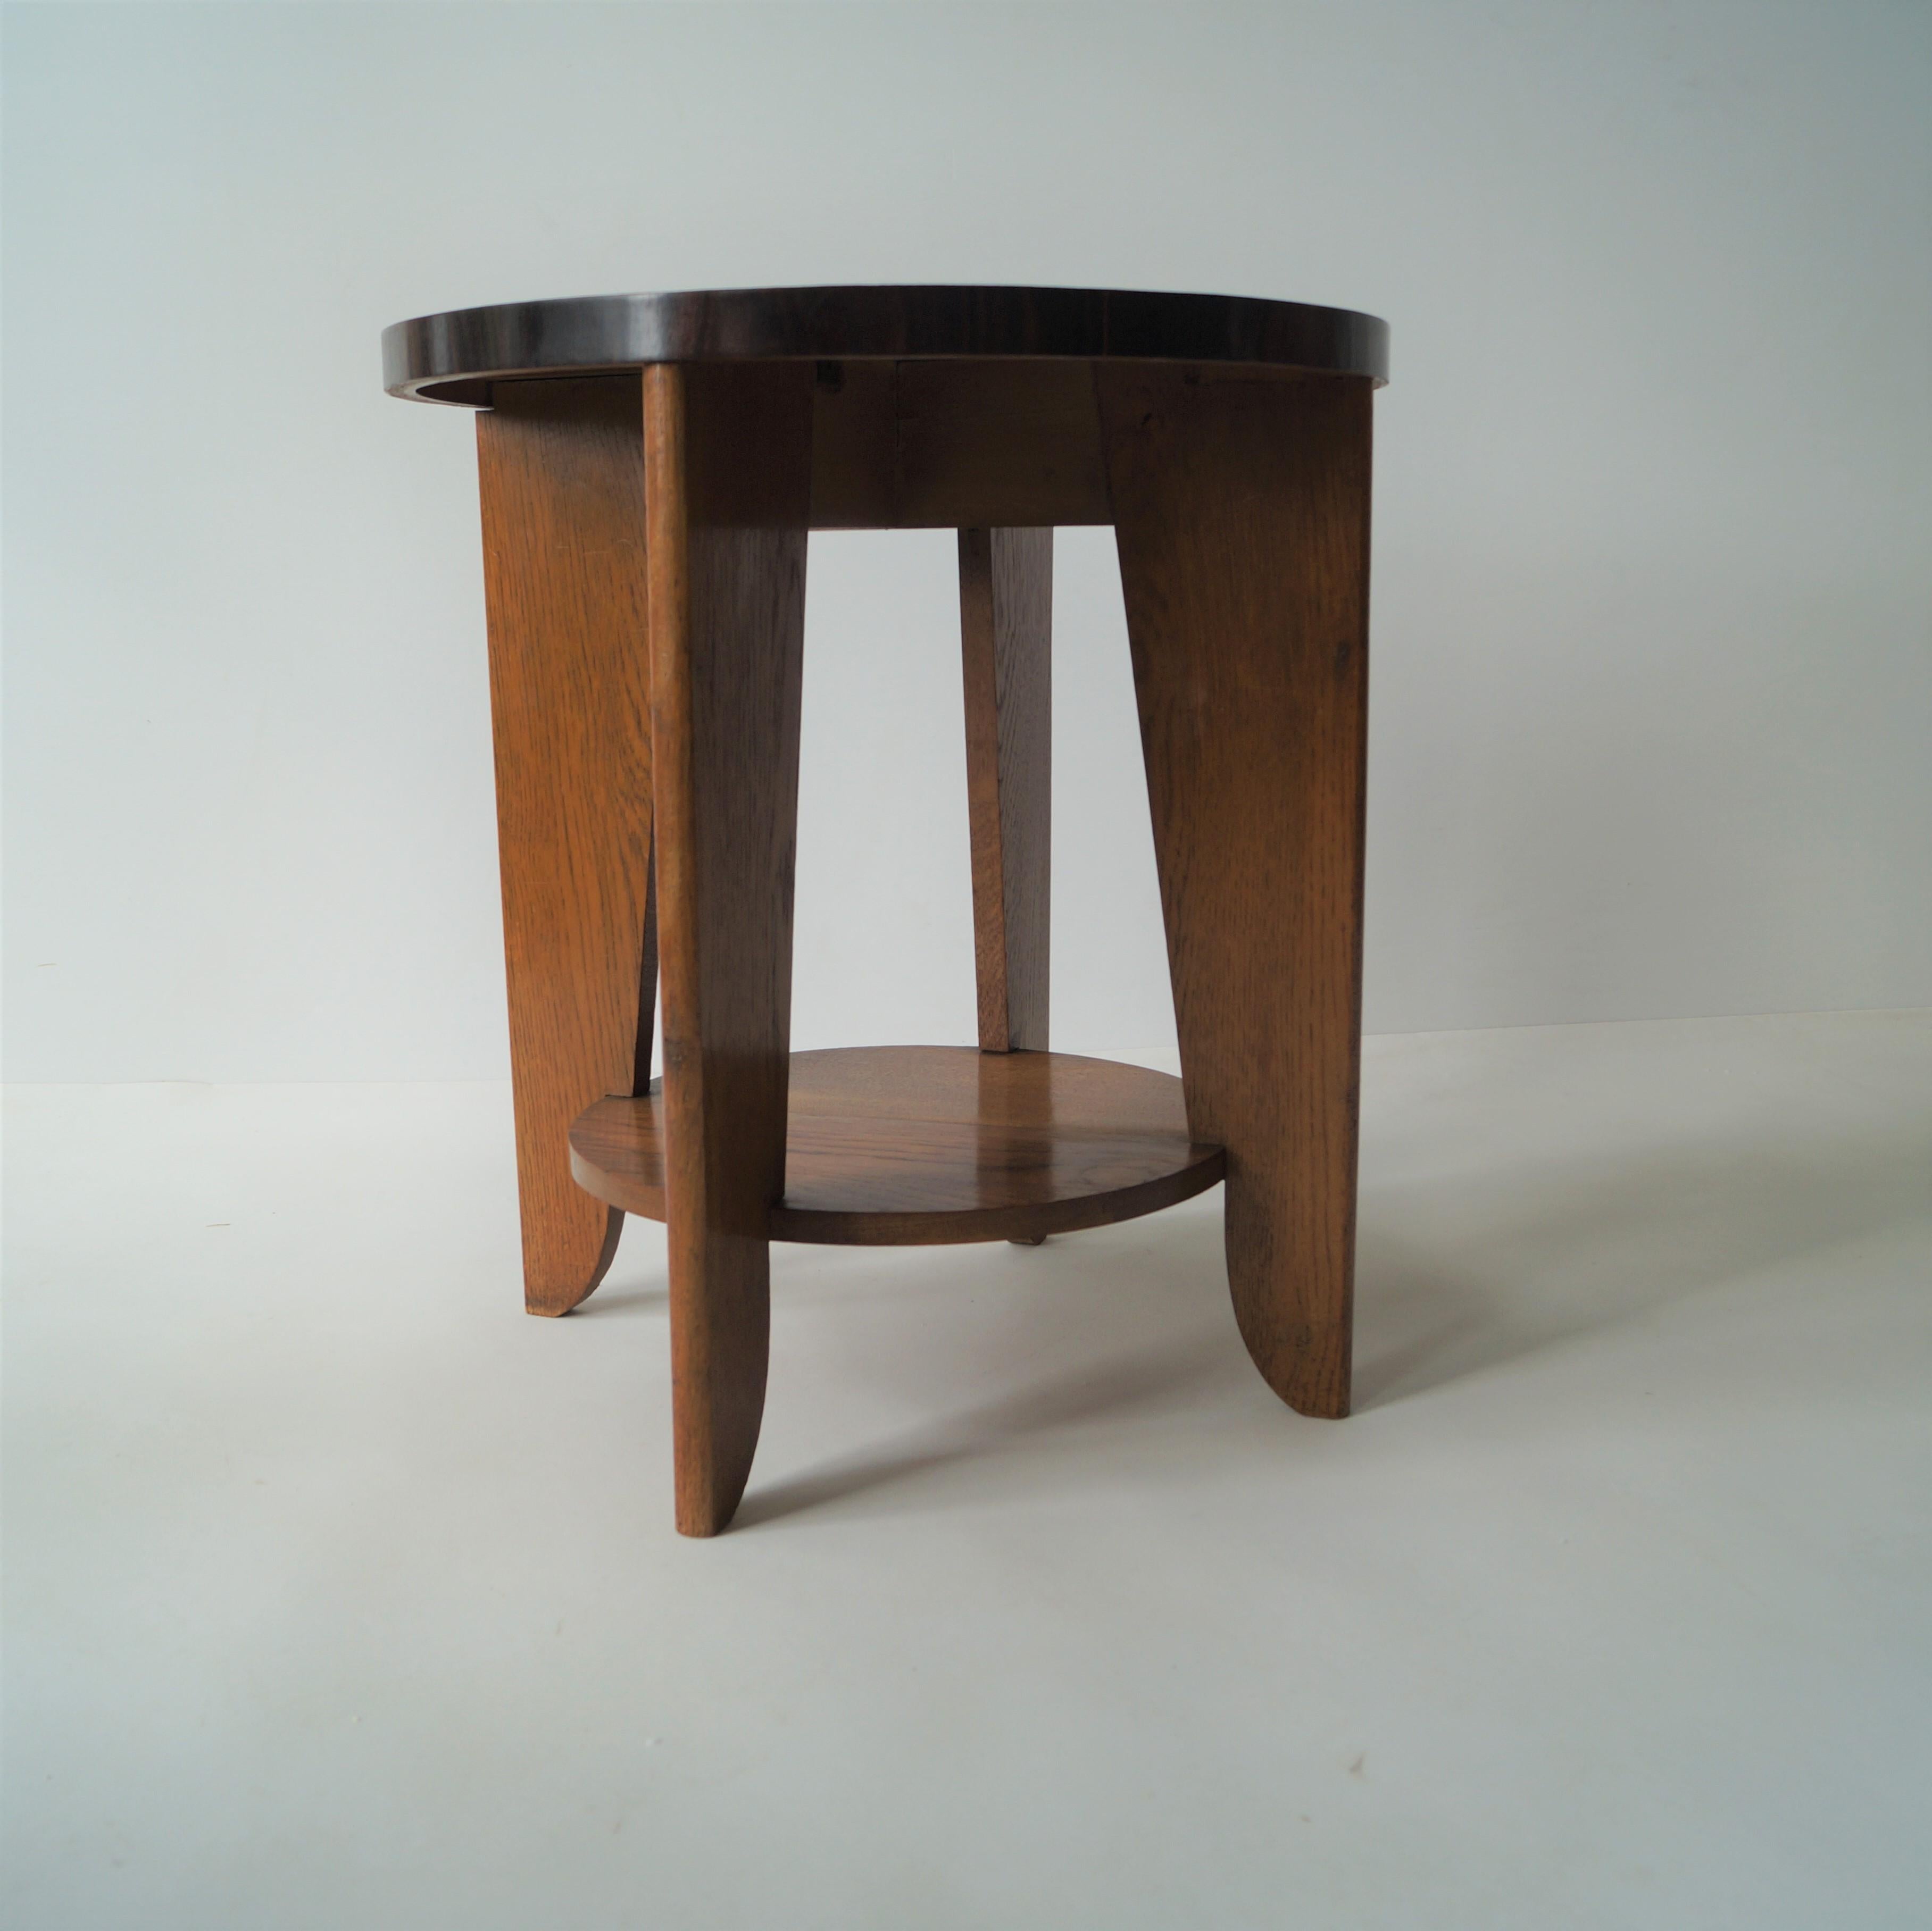 Dutch Art Deco Occasional Table Haagse School, 1930s For Sale 8